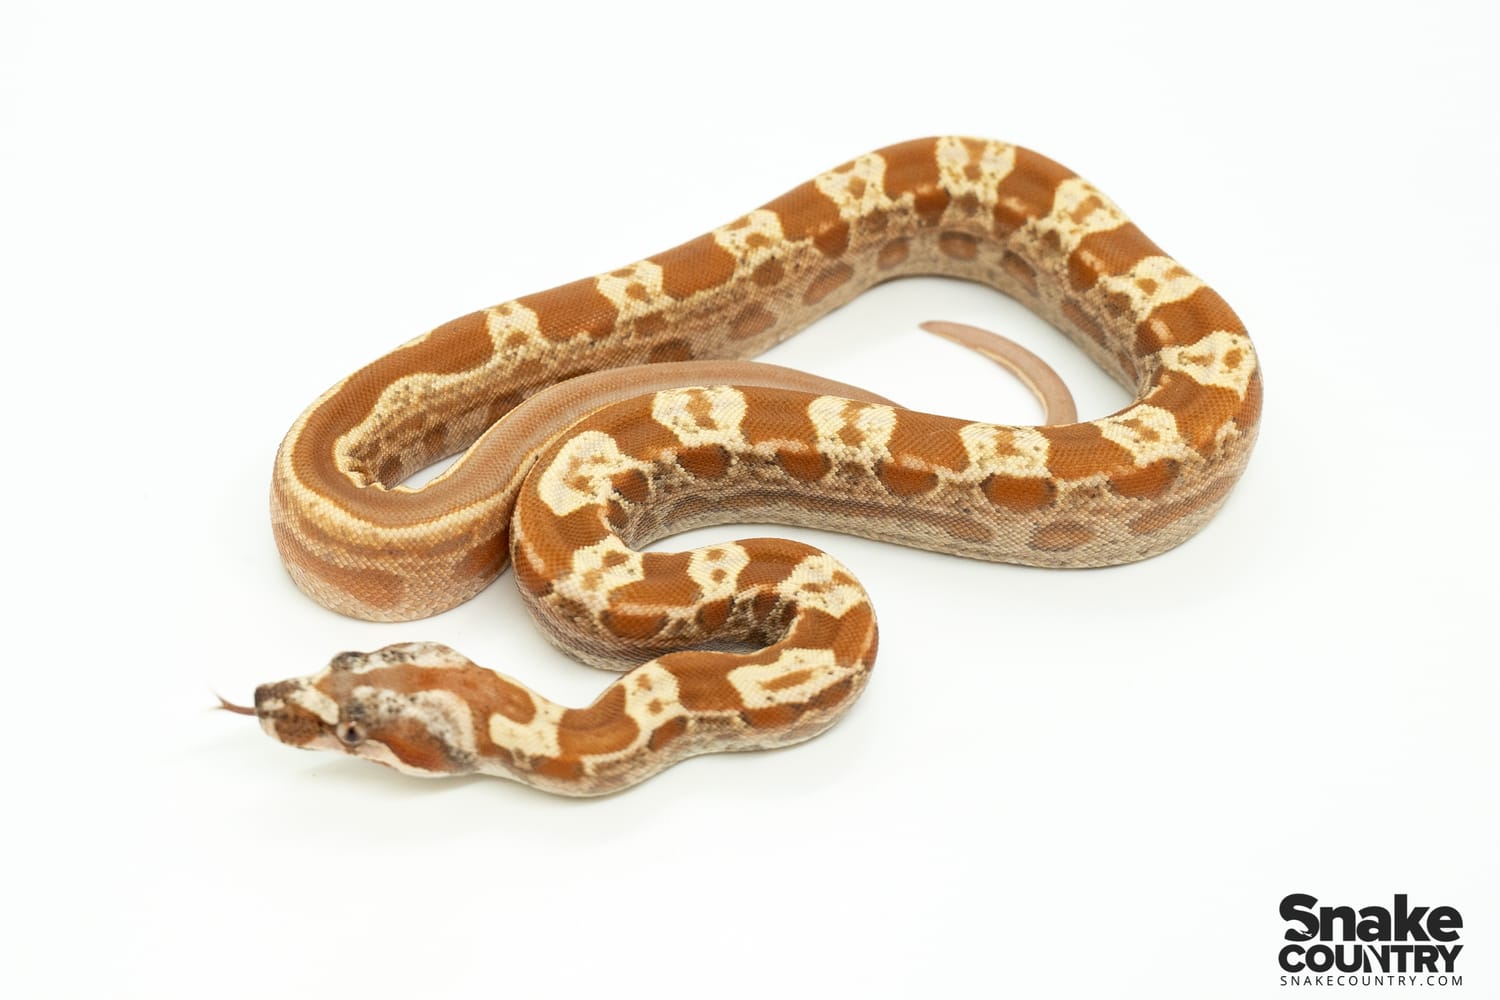 VPI IMG Sunglow Motley Jungle 66% Het Anery Boa Constrictor by Snake Country